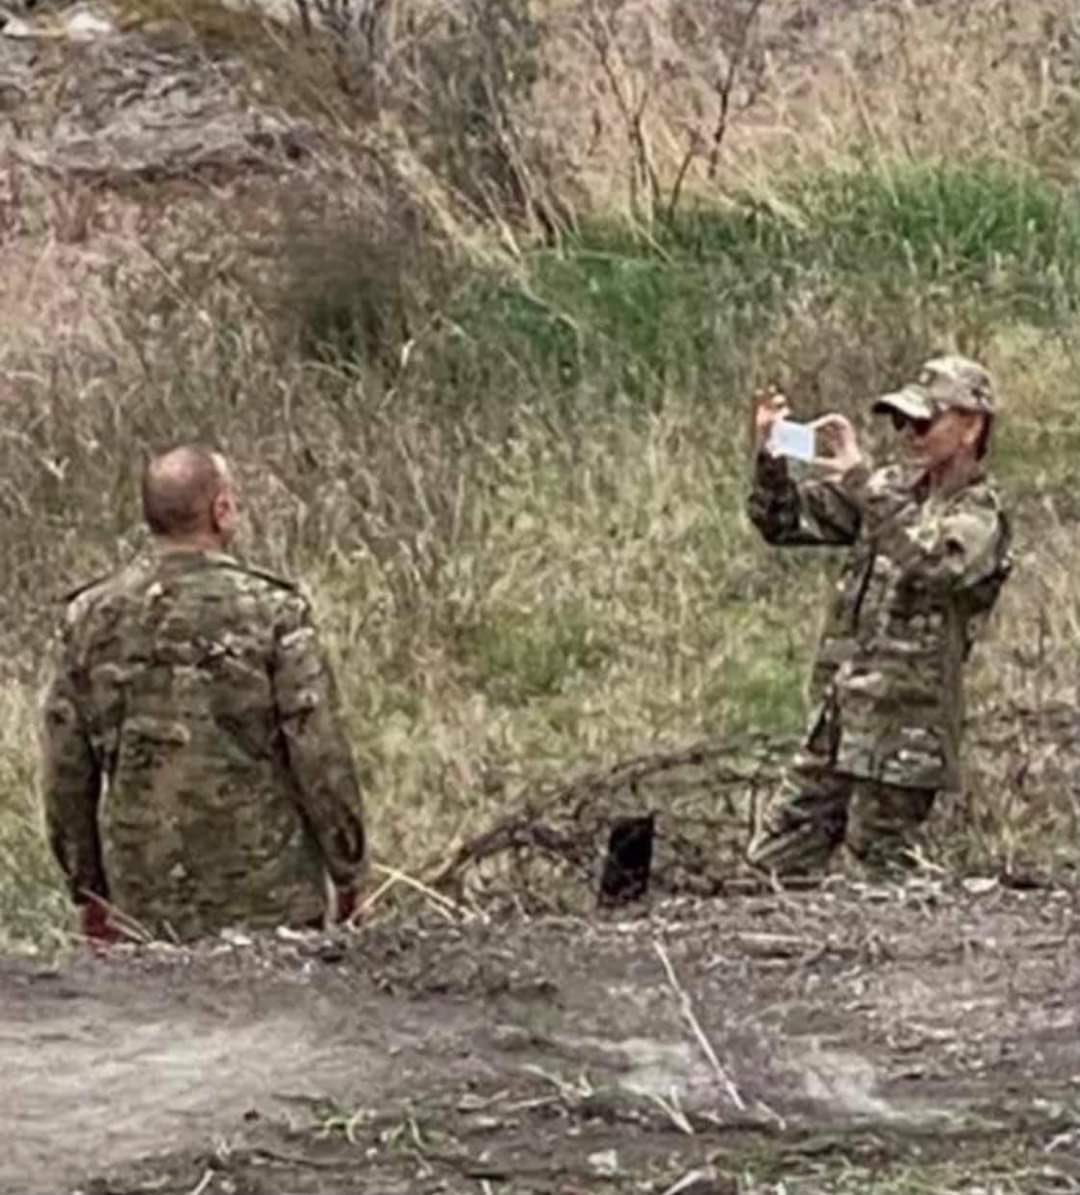 IRGC Releases Alleged Photo of Azerbaijani President In Sniper's Sights, Iran Says Presence Of Militants In Karabakh Unacceptable